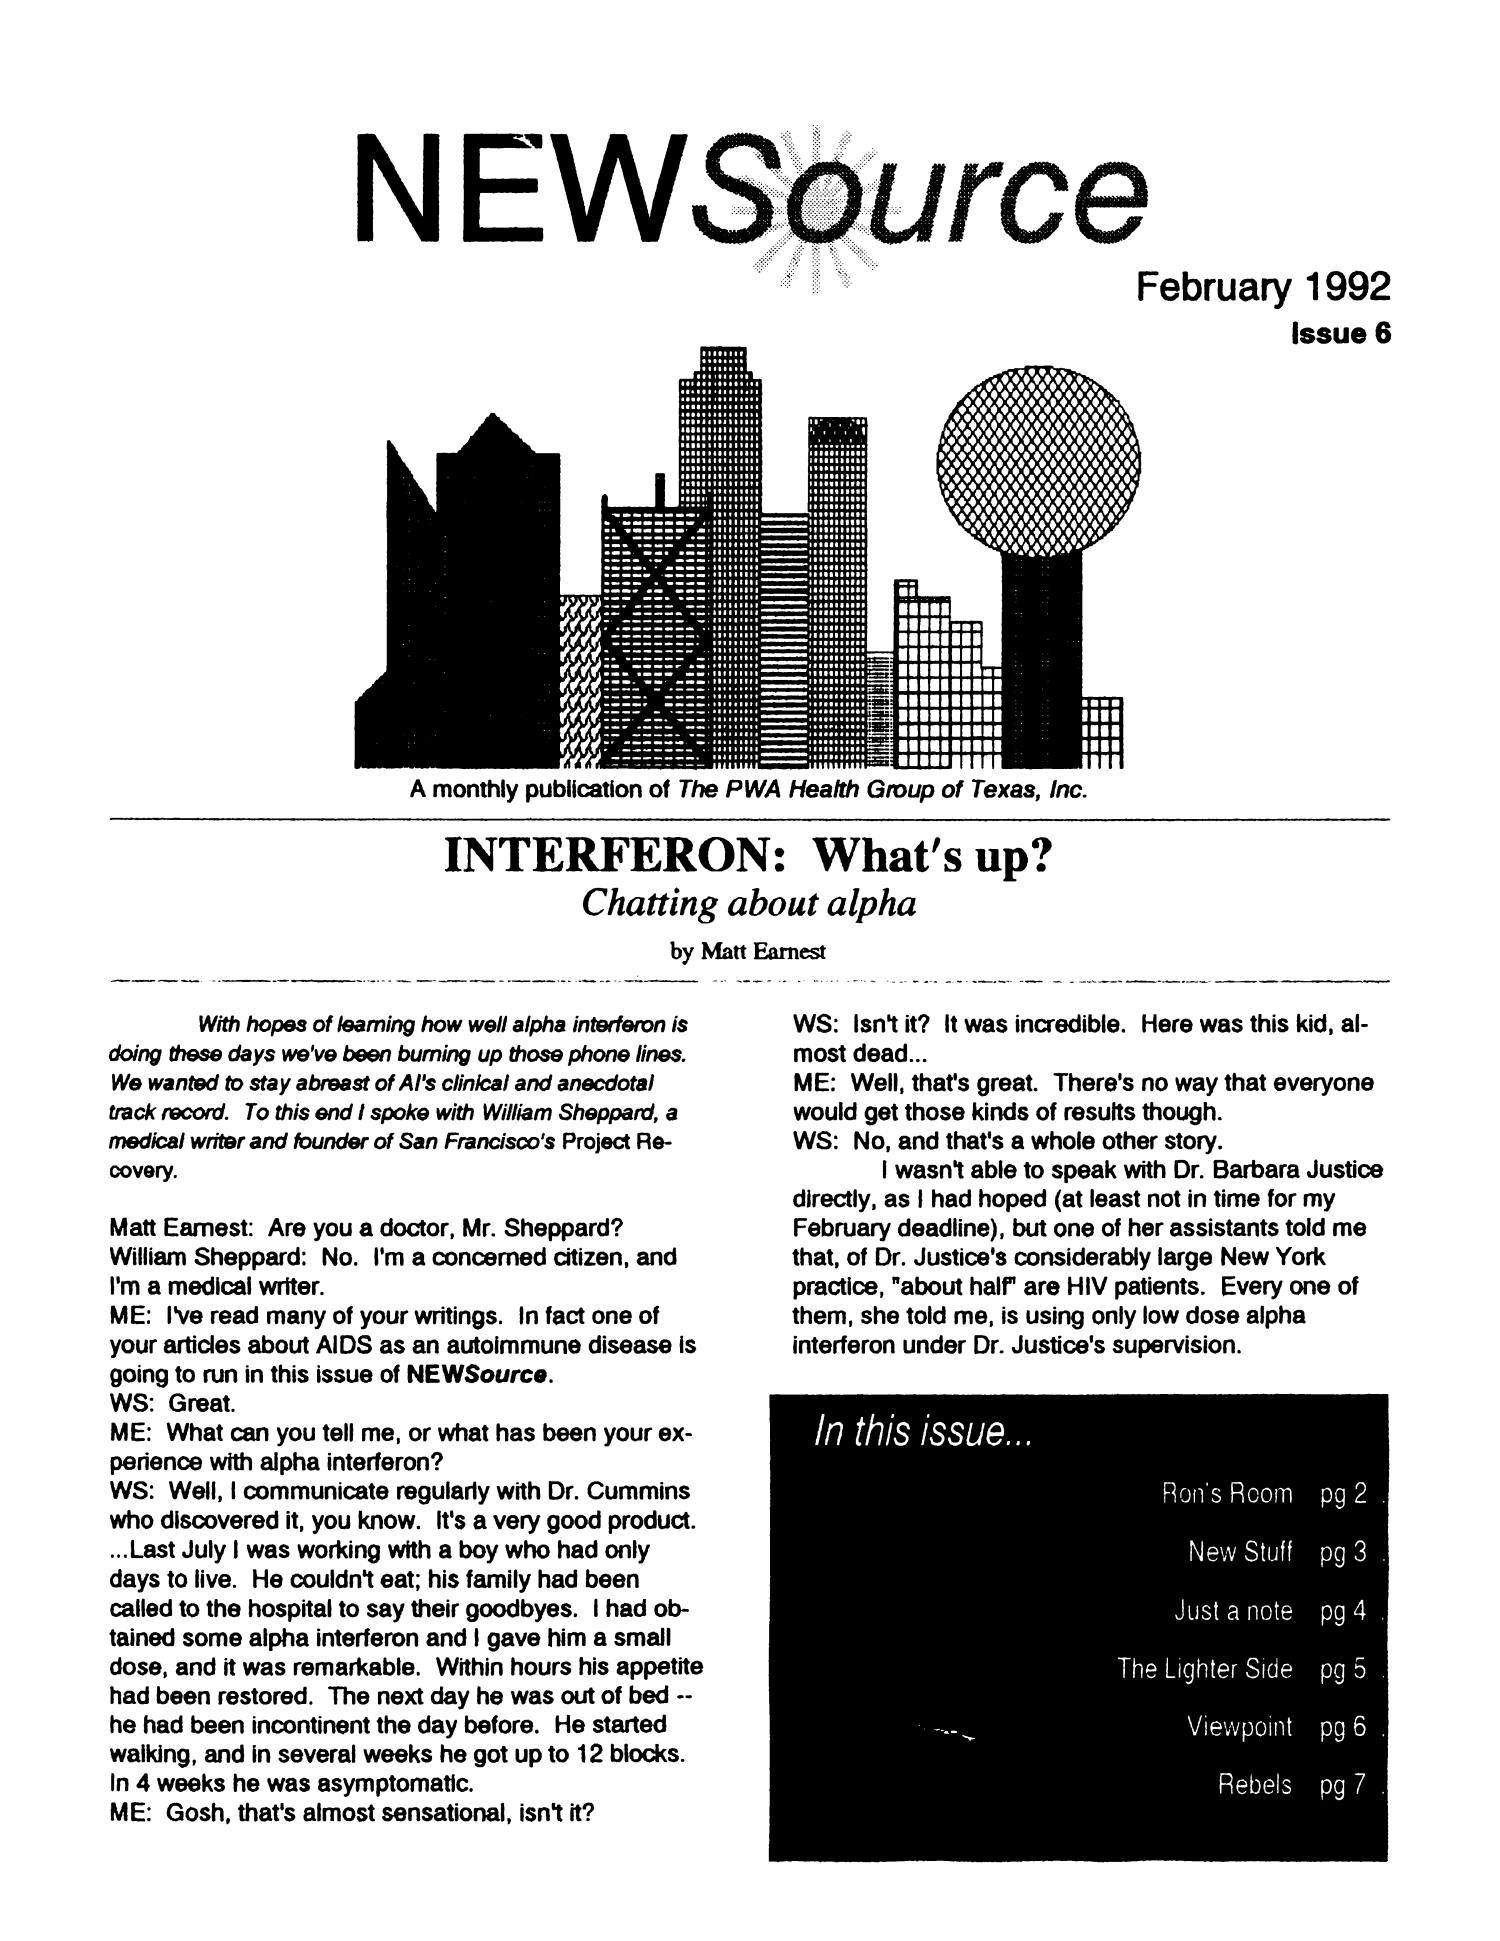 NEW Source, Issue 6, February 1992
                                                
                                                    1
                                                